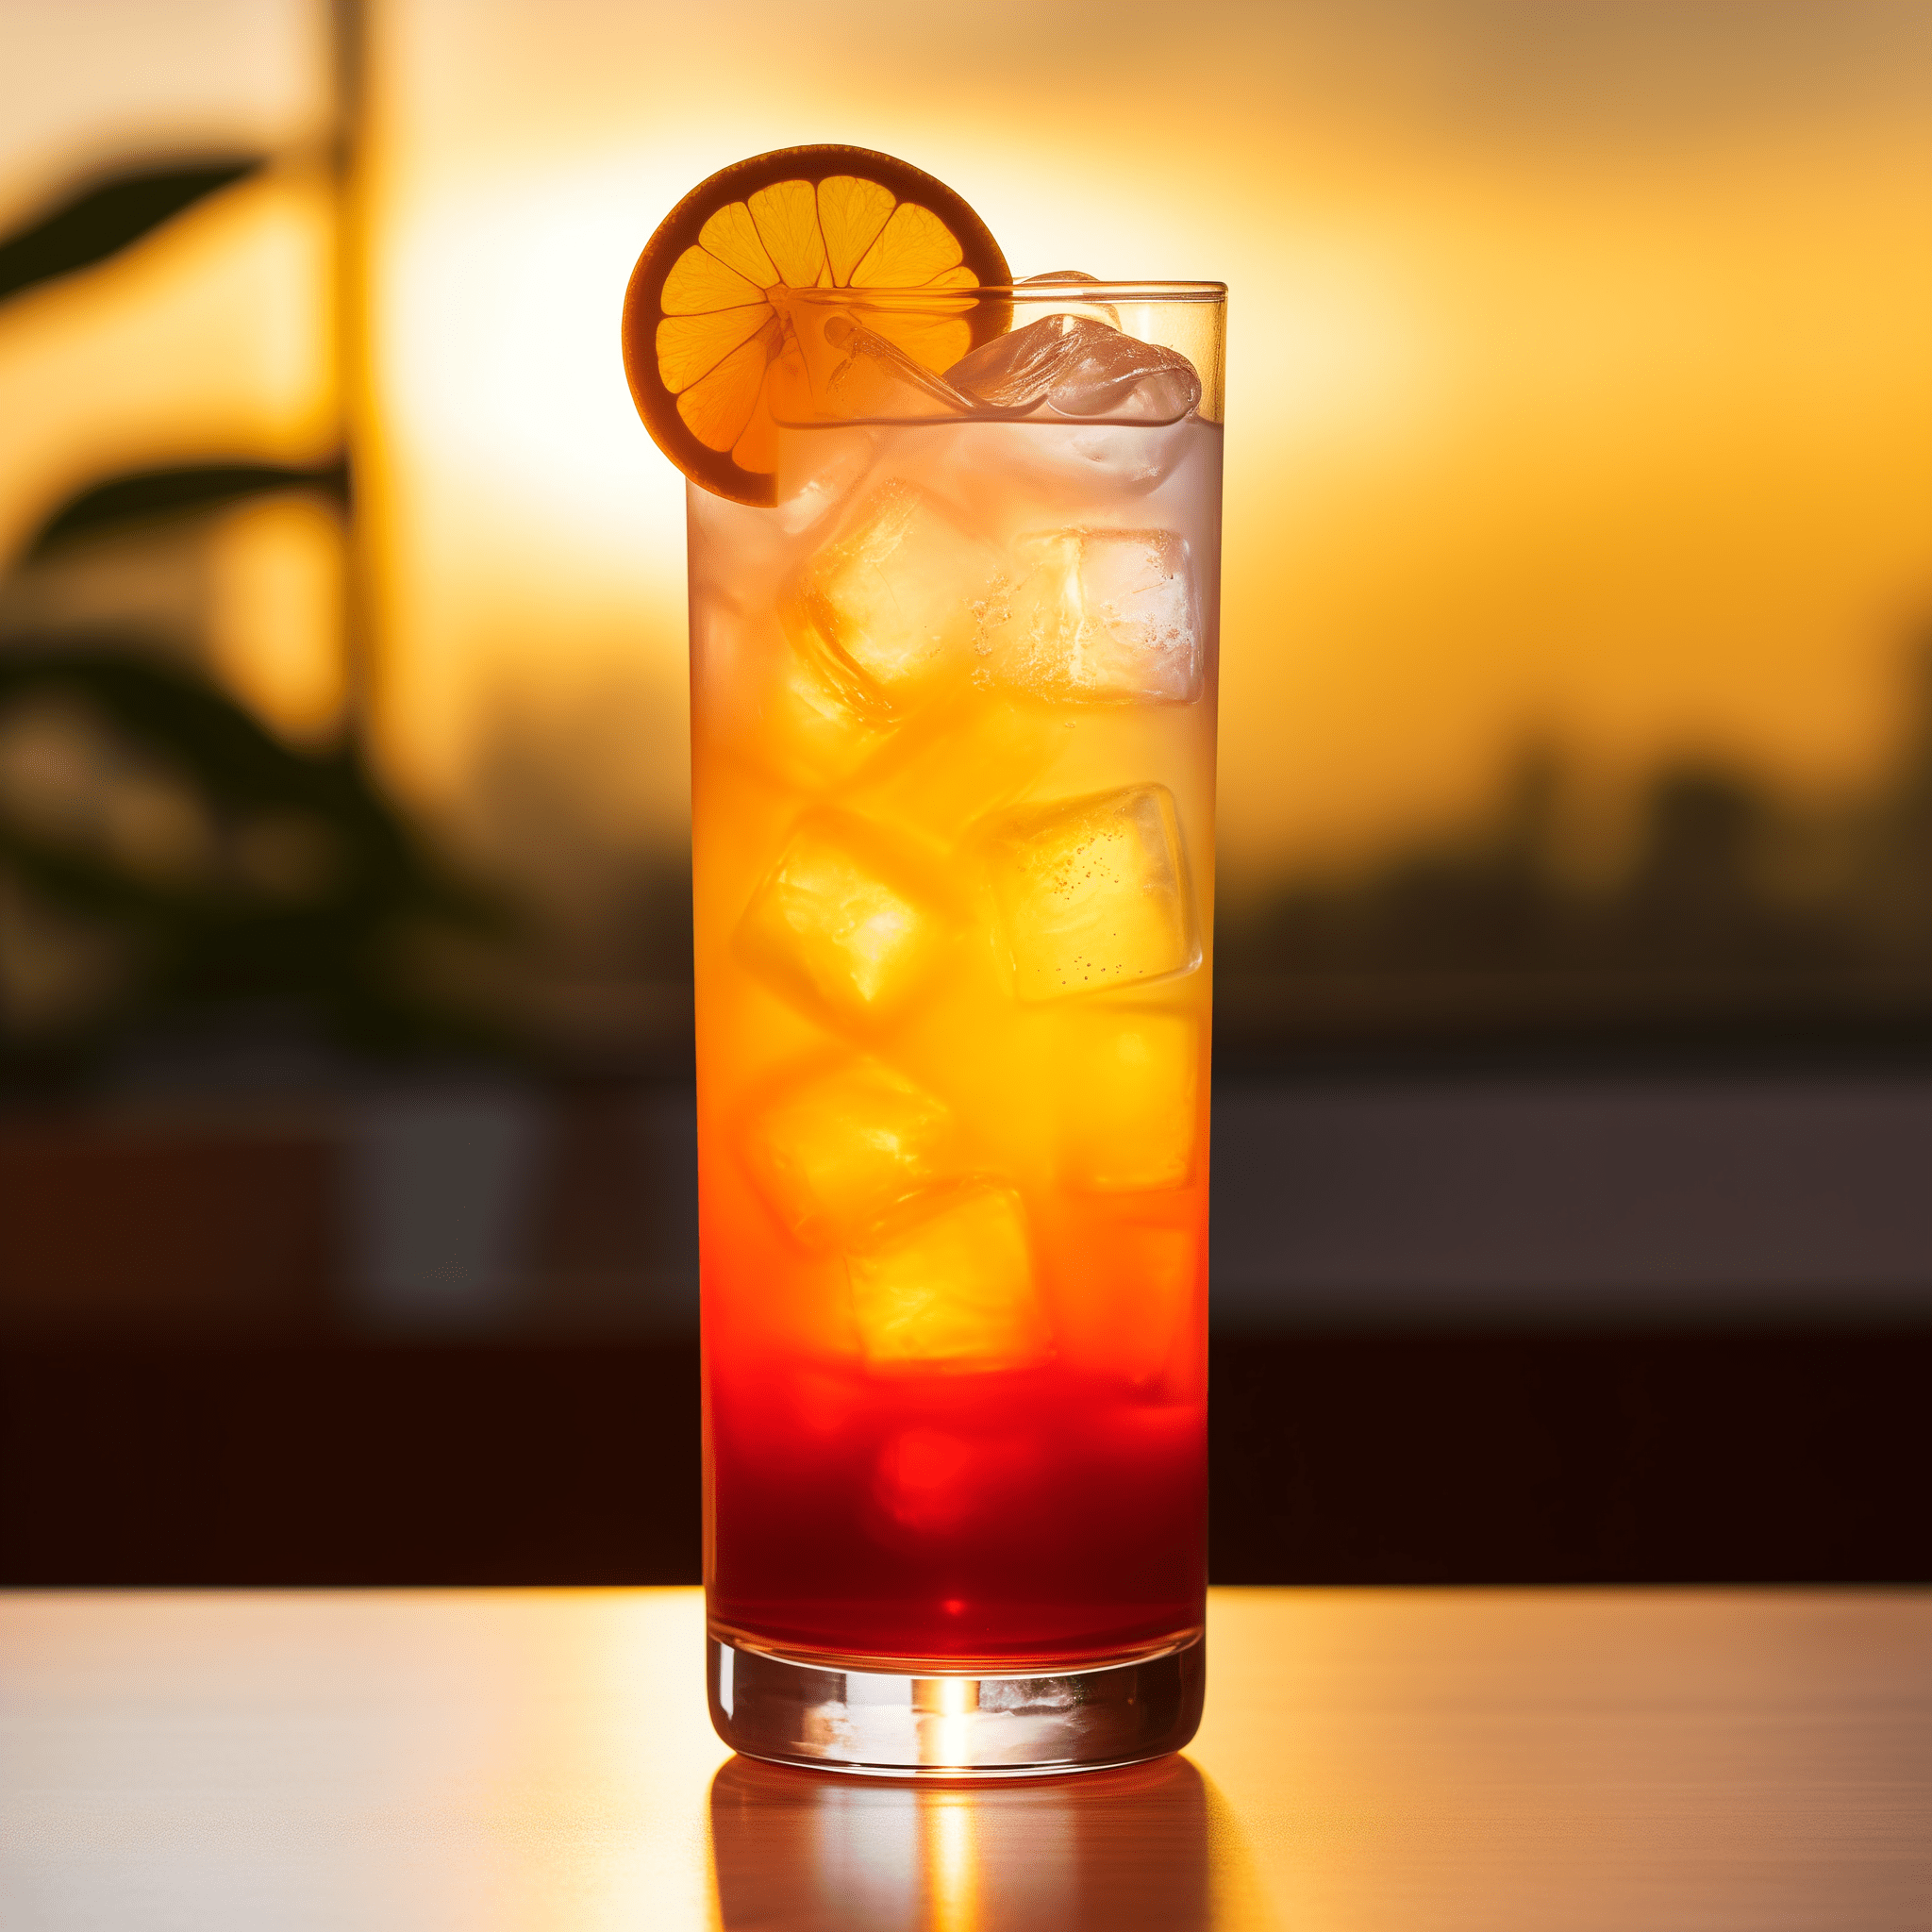 Sunset in Paradise Cocktail Recipe - The taste of Sunset in Paradise is a harmonious blend of sweet and tart flavors. It's a refreshing, fruity concoction with a hint of citrus and a smooth, velvety finish.